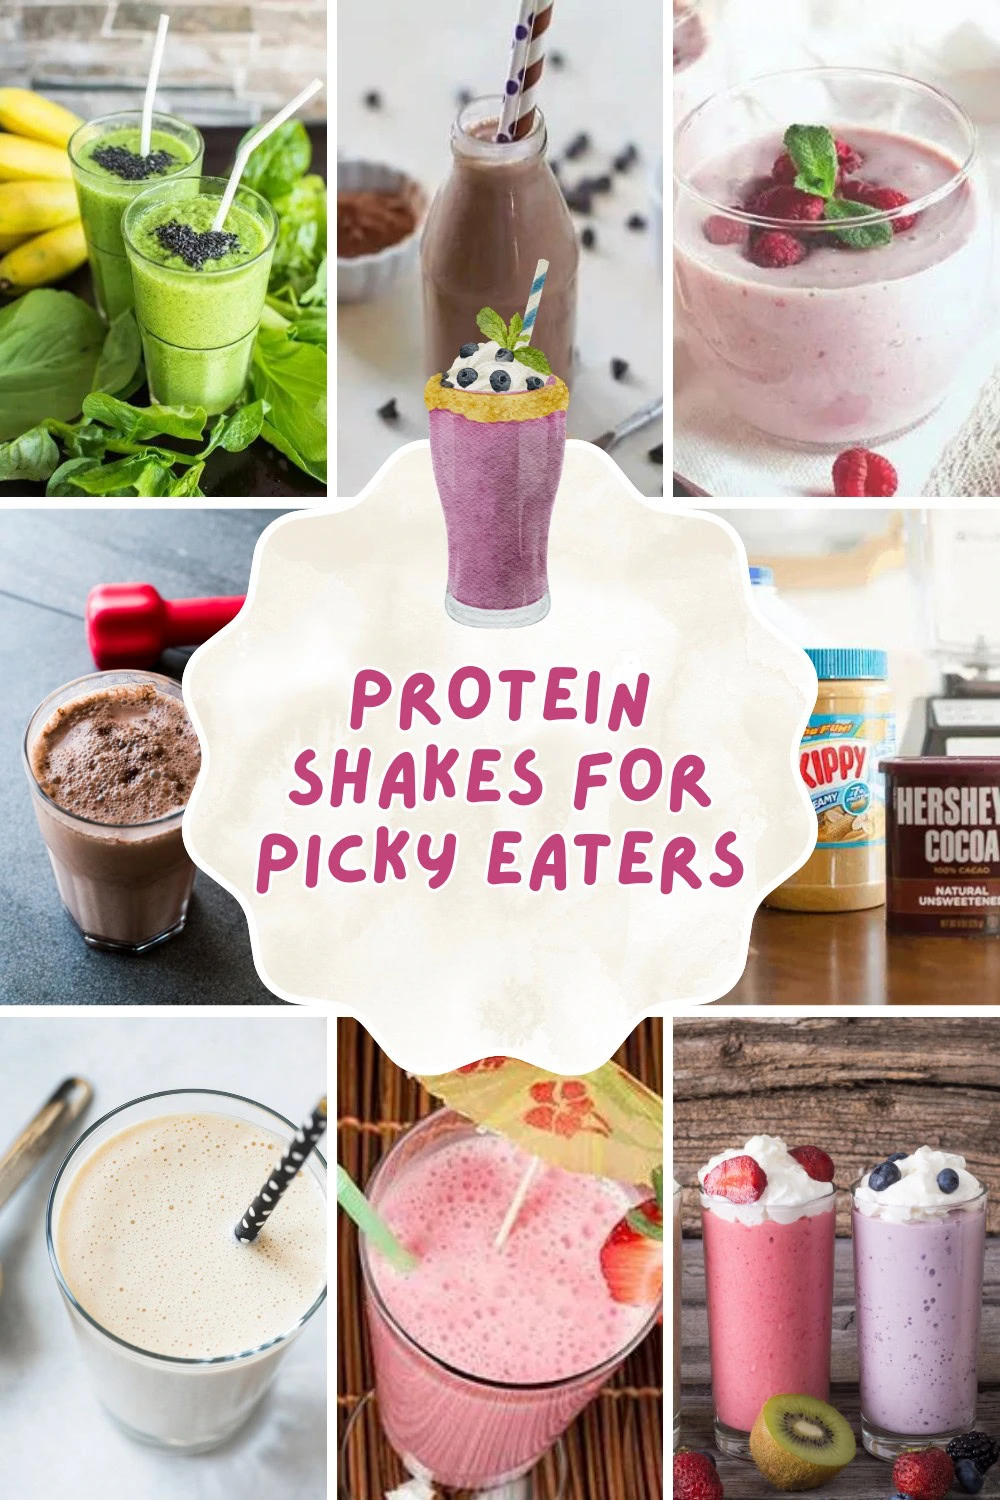 Struggling to get your kids or picky eaters to consume enough protein? These delicious and nutritious protein shakes are a game-changer! Packed with essential nutrients, they're perfect for boosting energy and supporting growth. Easy to make and kid-approved! 🥳🍓 #HealthyKids #ProteinShakes #PickyEaters #KidFriendlyRecipes



